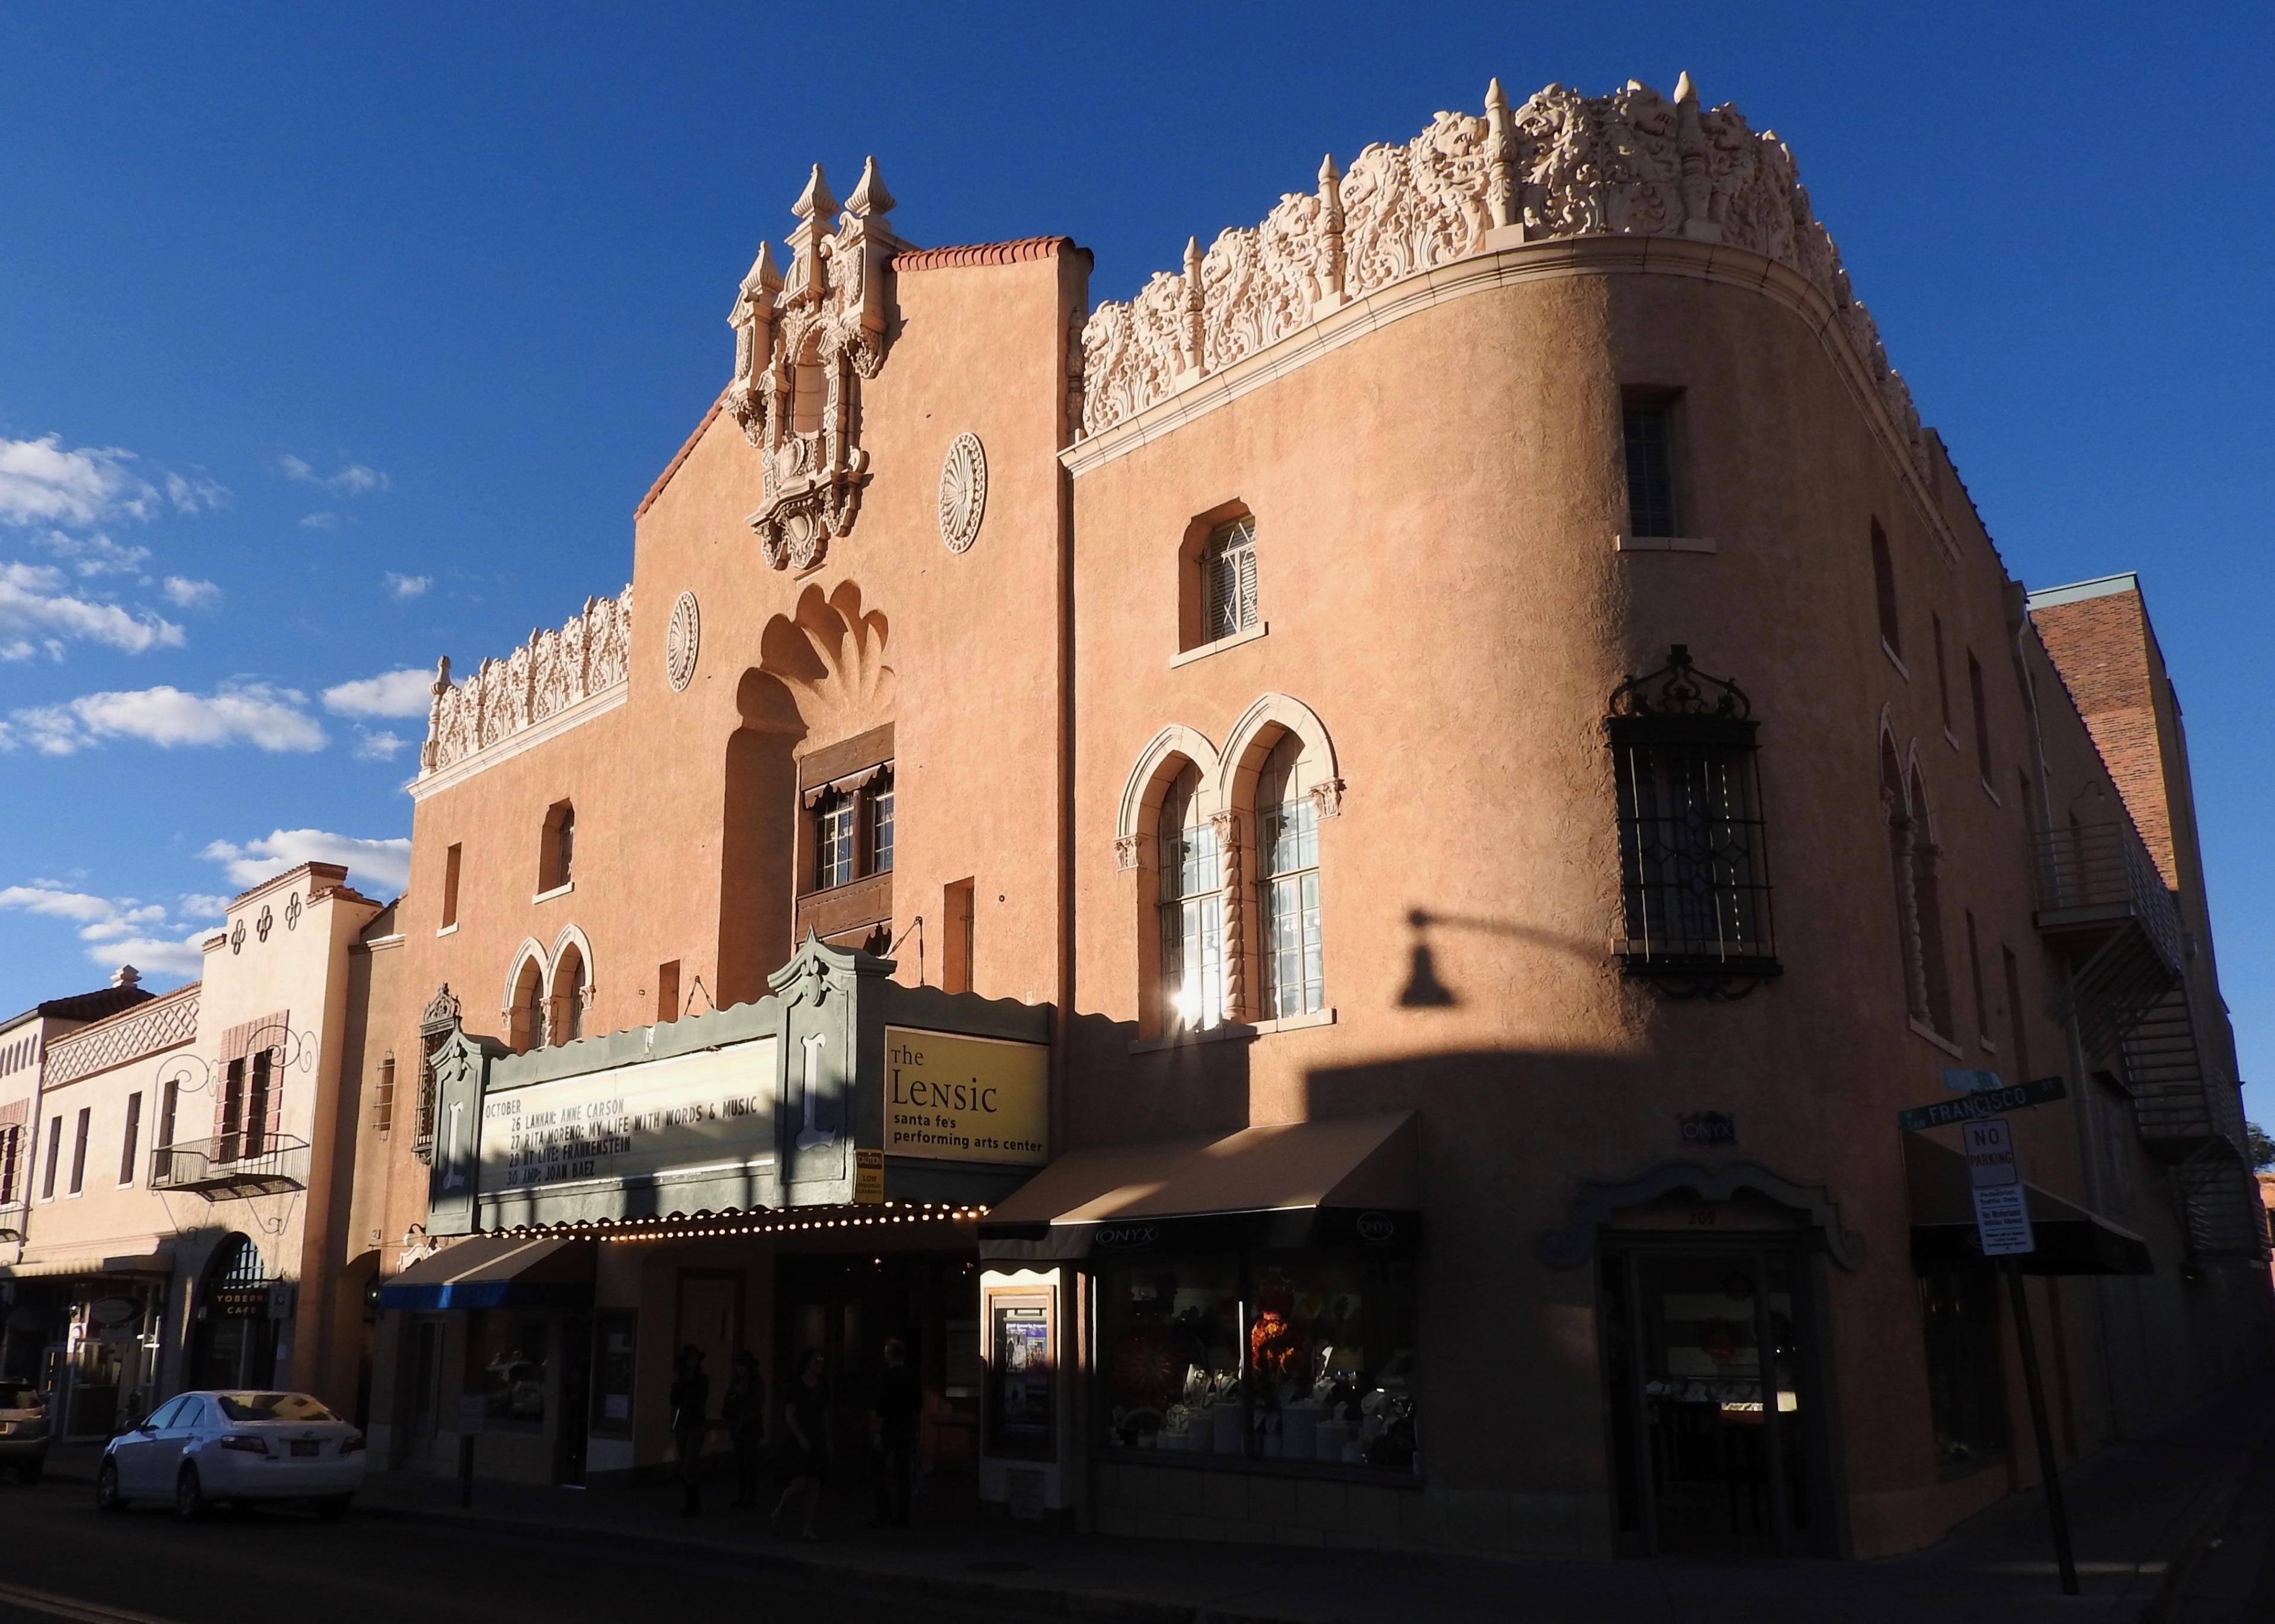 The Lensic Theater, located at 211 West San Francisco Street in Santa Fe, New Mexico, is an 821-seat theater designed by Boller Brothers of Kansas City, well-known movie-theater and vaudeville-house architects who designed almost one hundred theaters throughout the West and mid-West, including the KiMo Theater in Albuquerque. The pseudo-Moorish, Spanish Renaissance Lensic was built by Nathan Salmon and E. John Greer and opened on 24 June 1931. Its name derives from the initials of Greer's six grandchildren. The Lensic was completely restored and renovated between 1999 and 2001, and provides Santa Fe and Northern New Mexico with a modern venue for the performing arts.

#OnTheRoad #Trovember